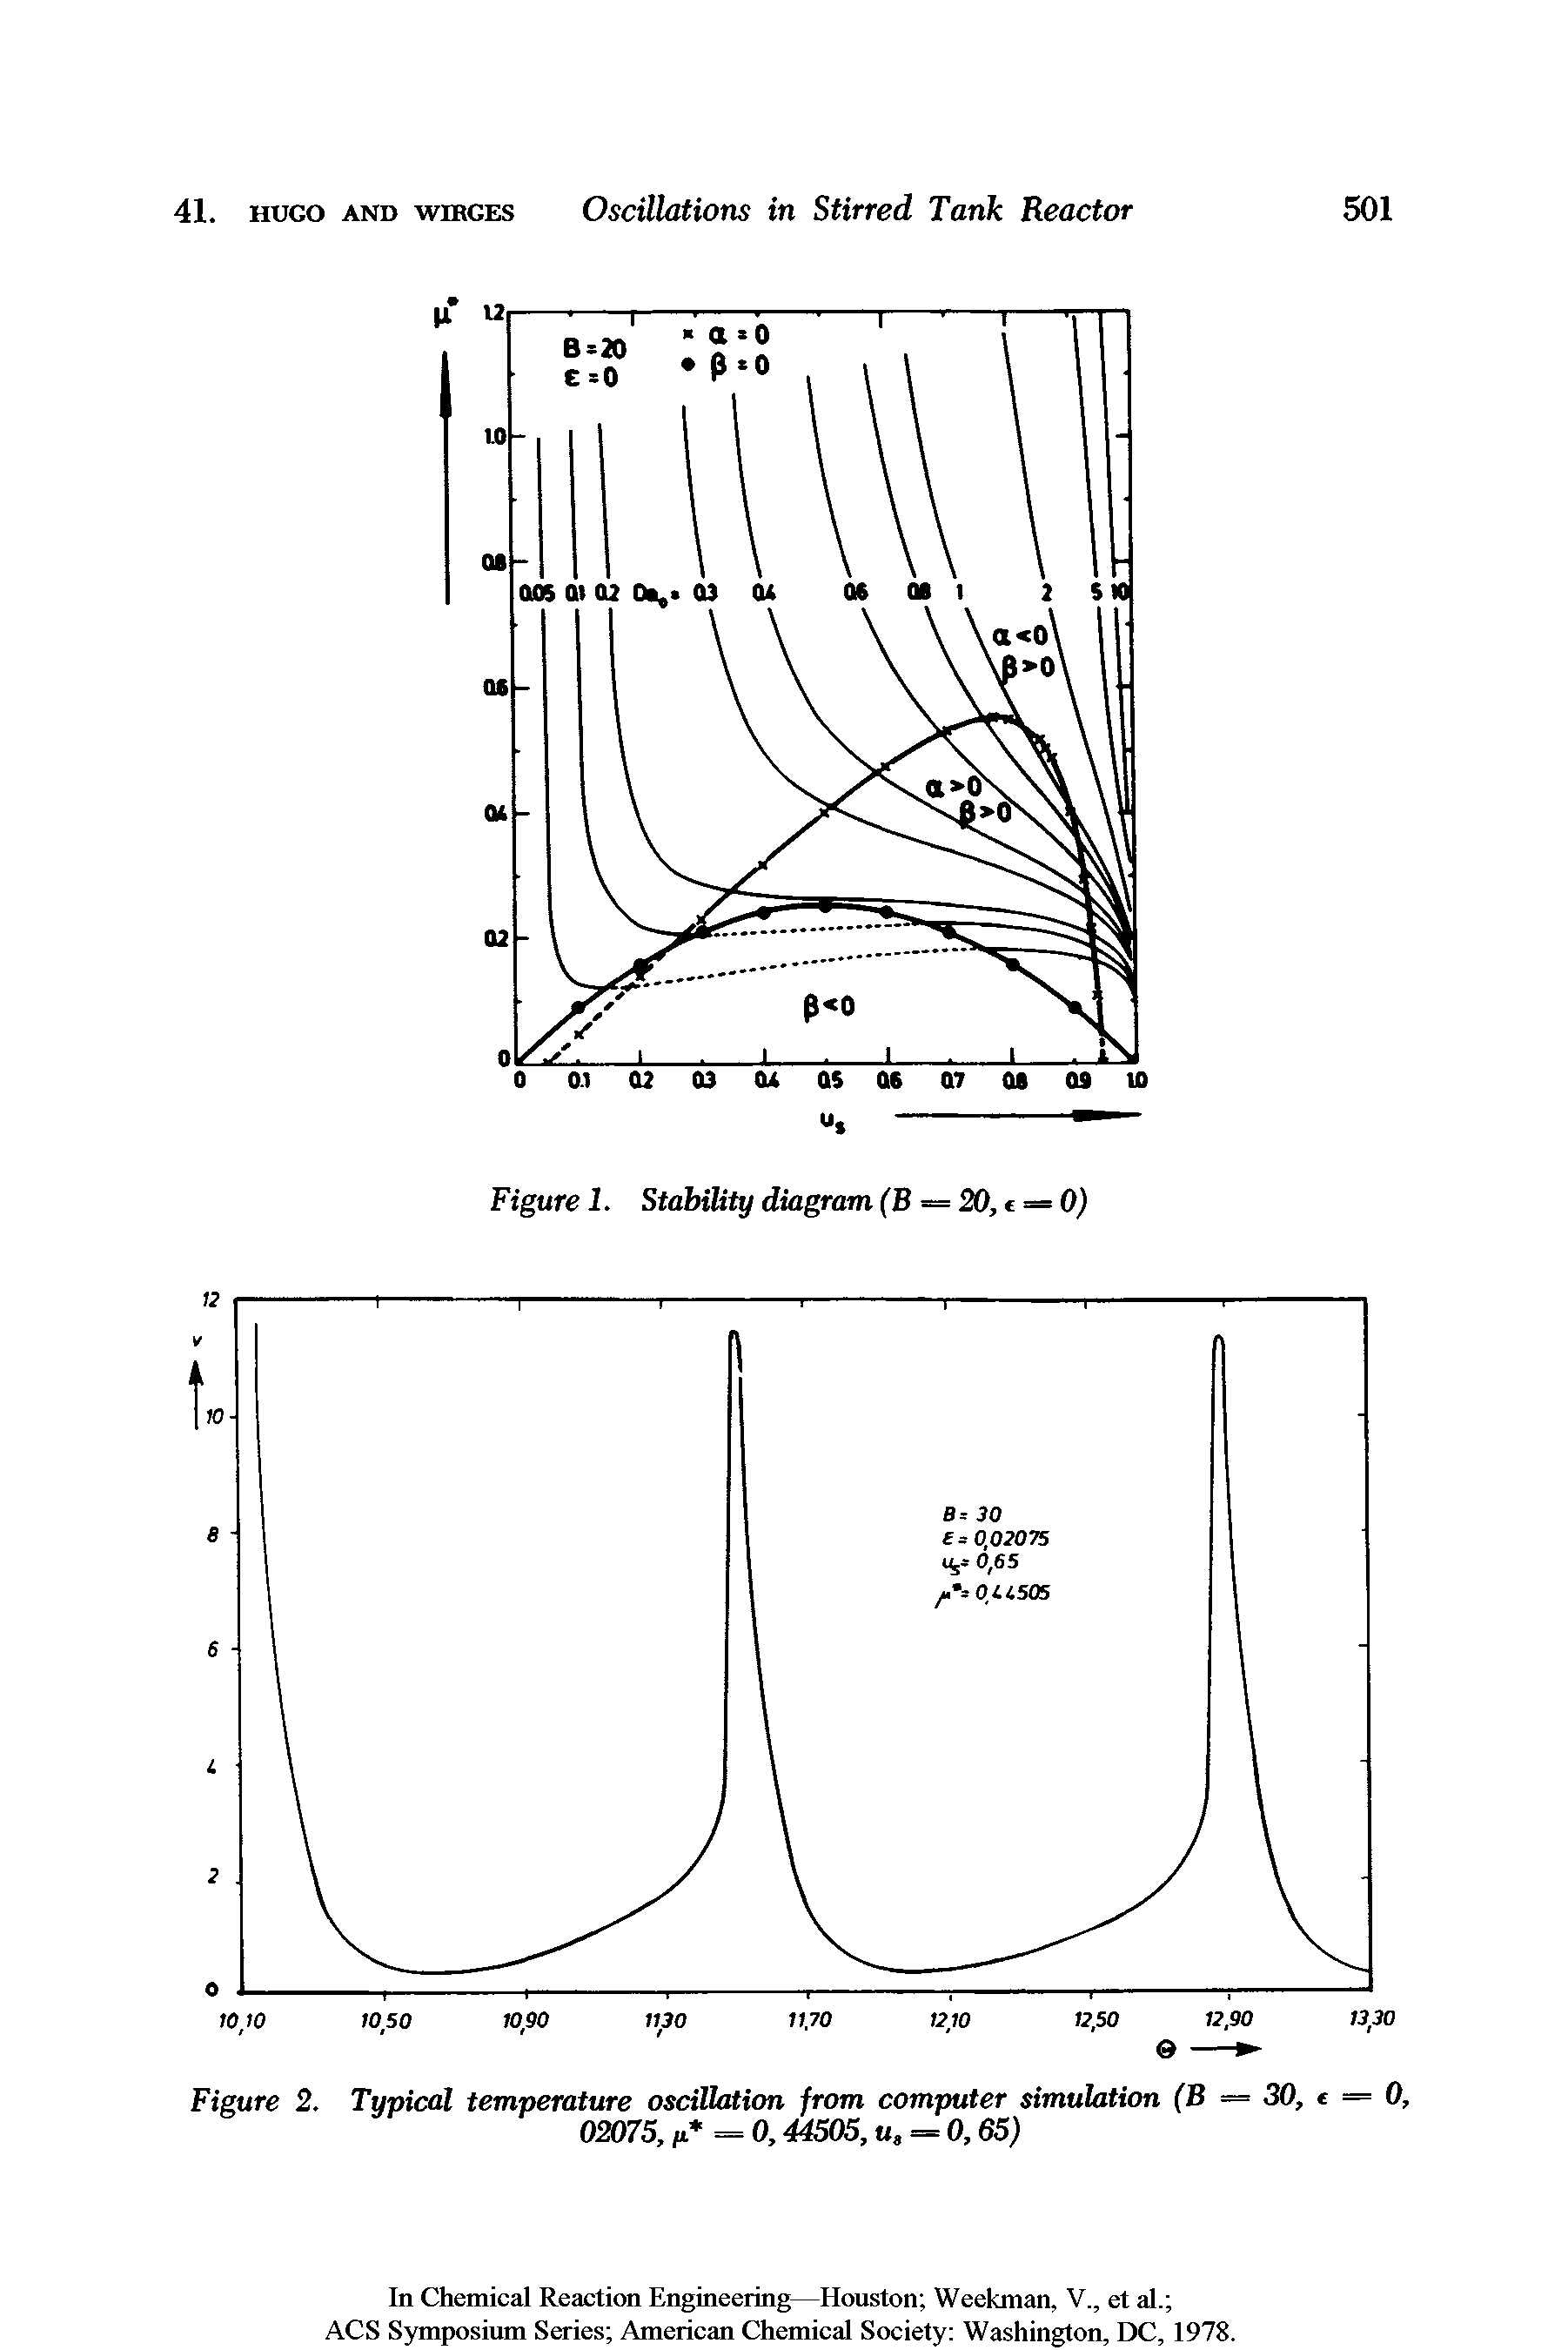 Figure 2. Typical temperature oscillation from computer simulation (B = 30, t = 0, 02075,, t = 0,44505, u, = 0,65)...